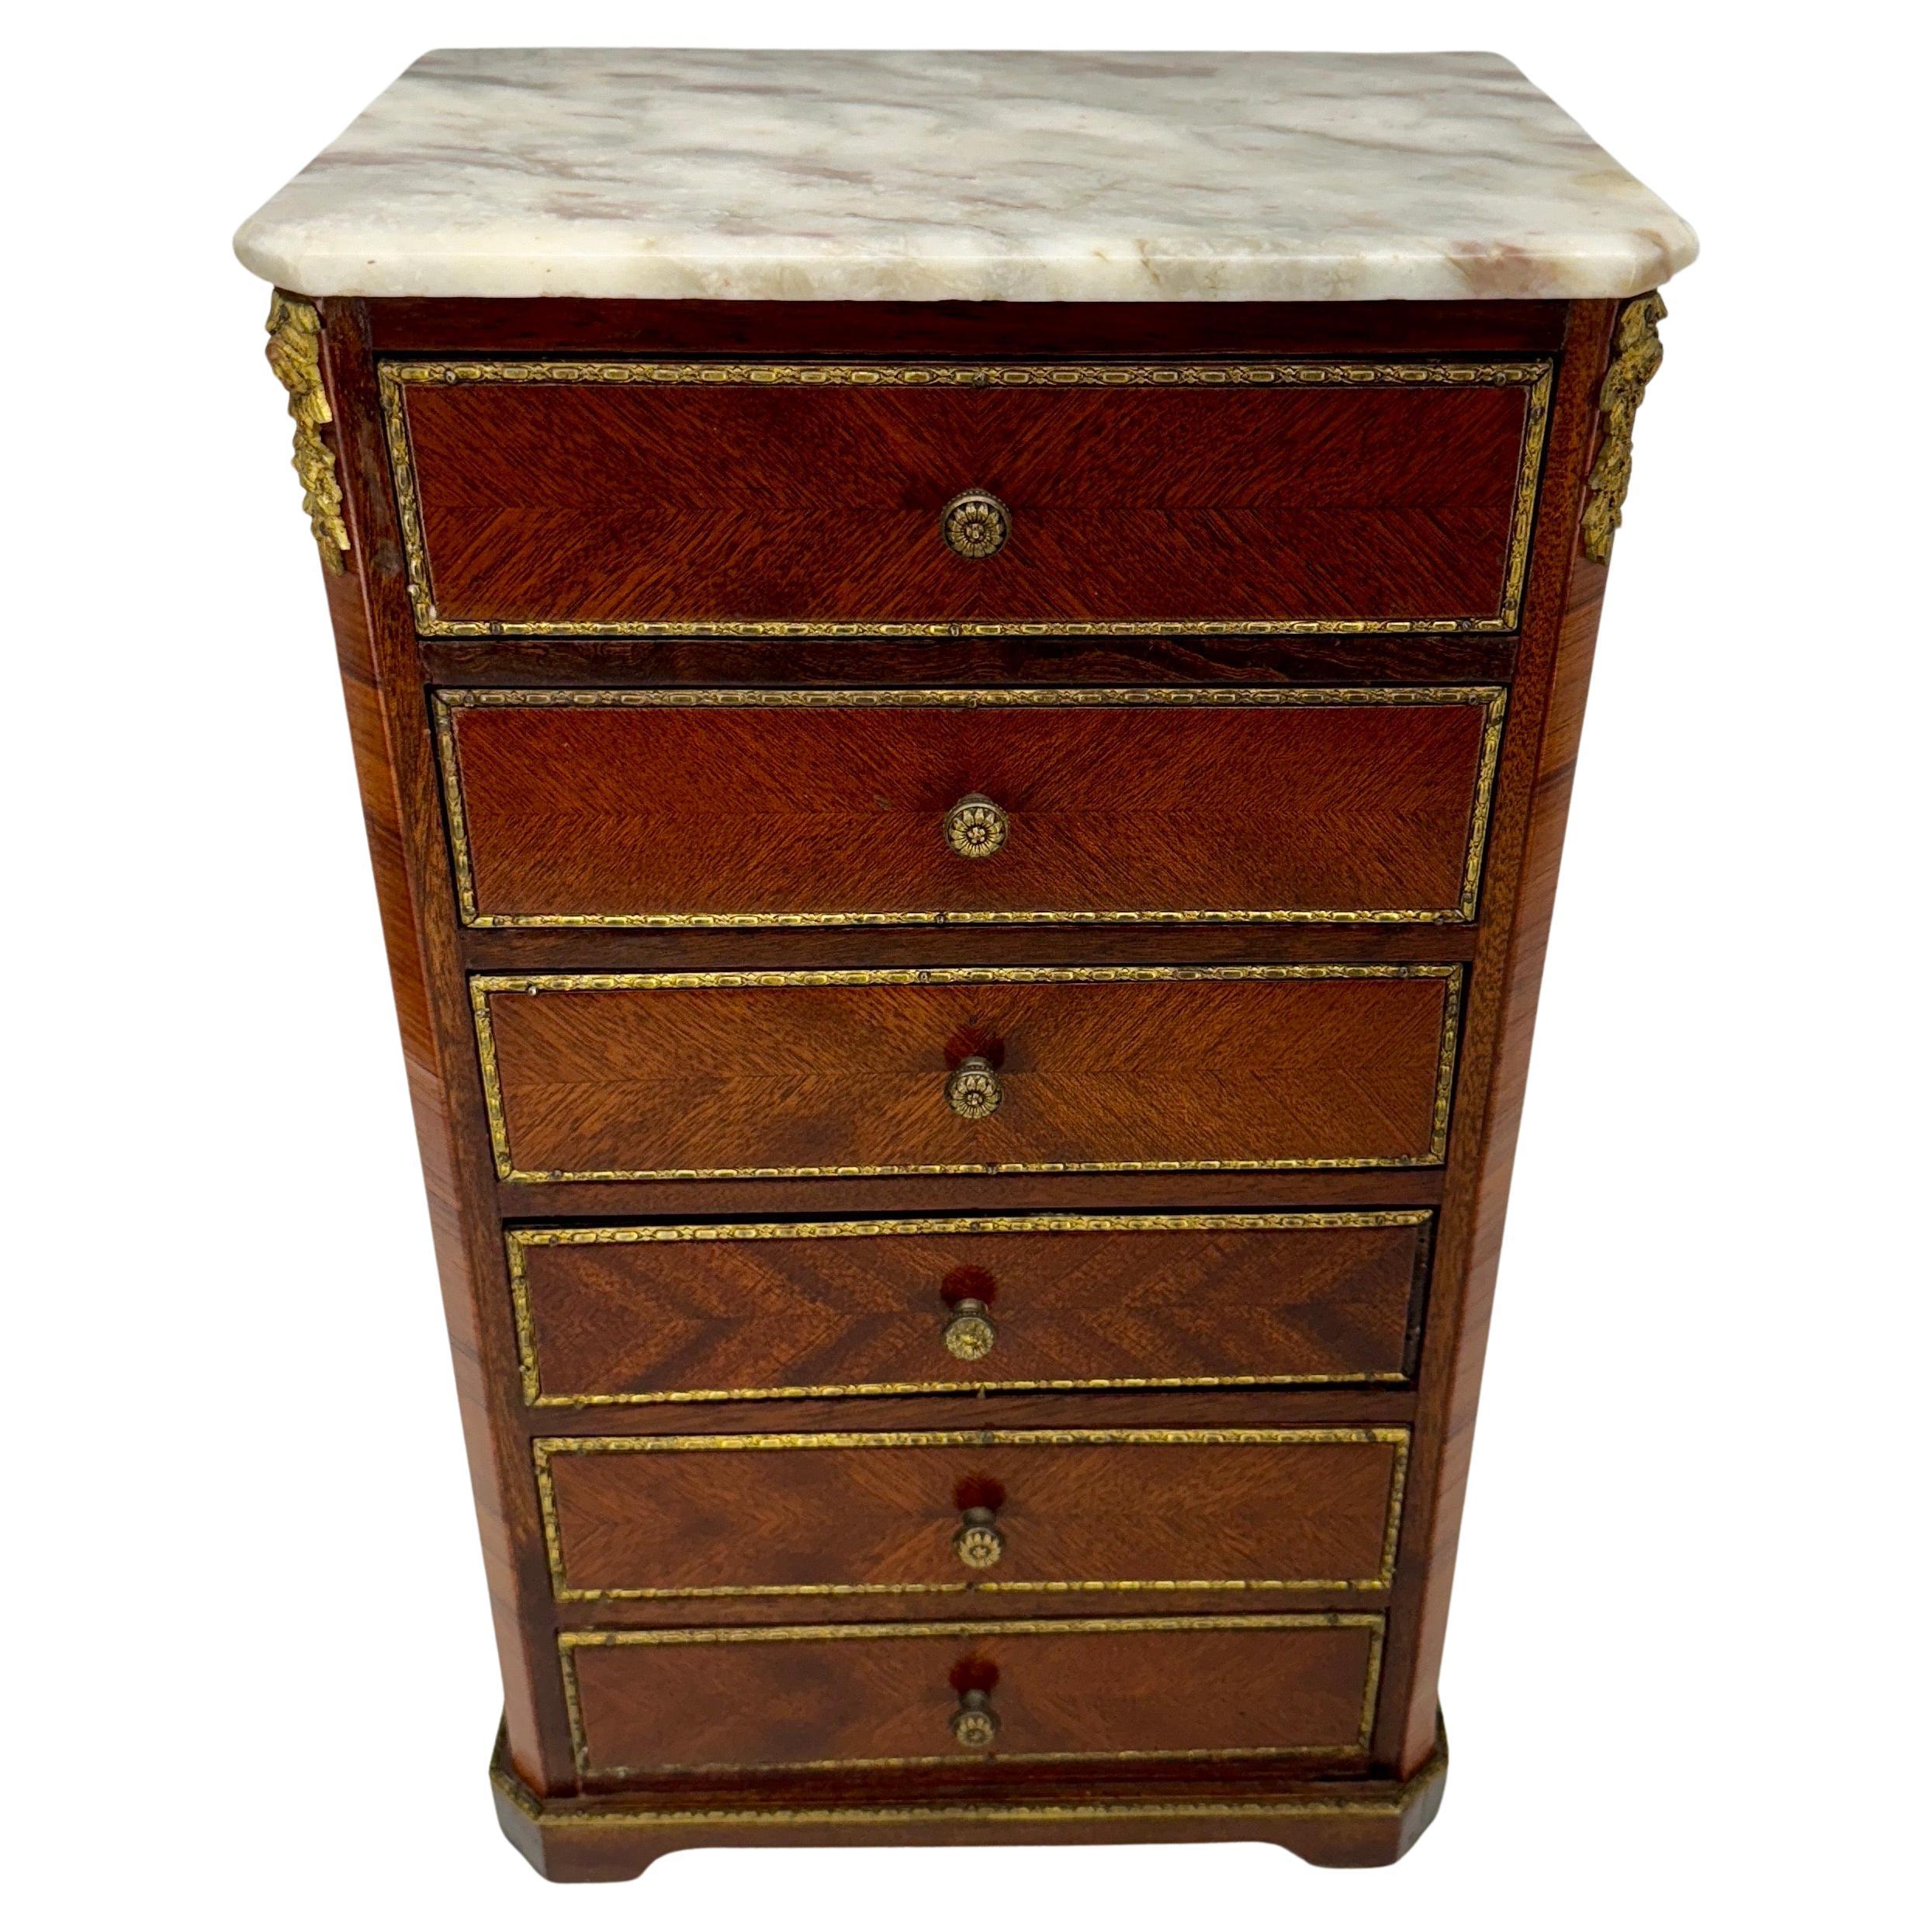 Small French marble top Louis XV style table-based chest of 6 drawers for jewelry or lingerie.
